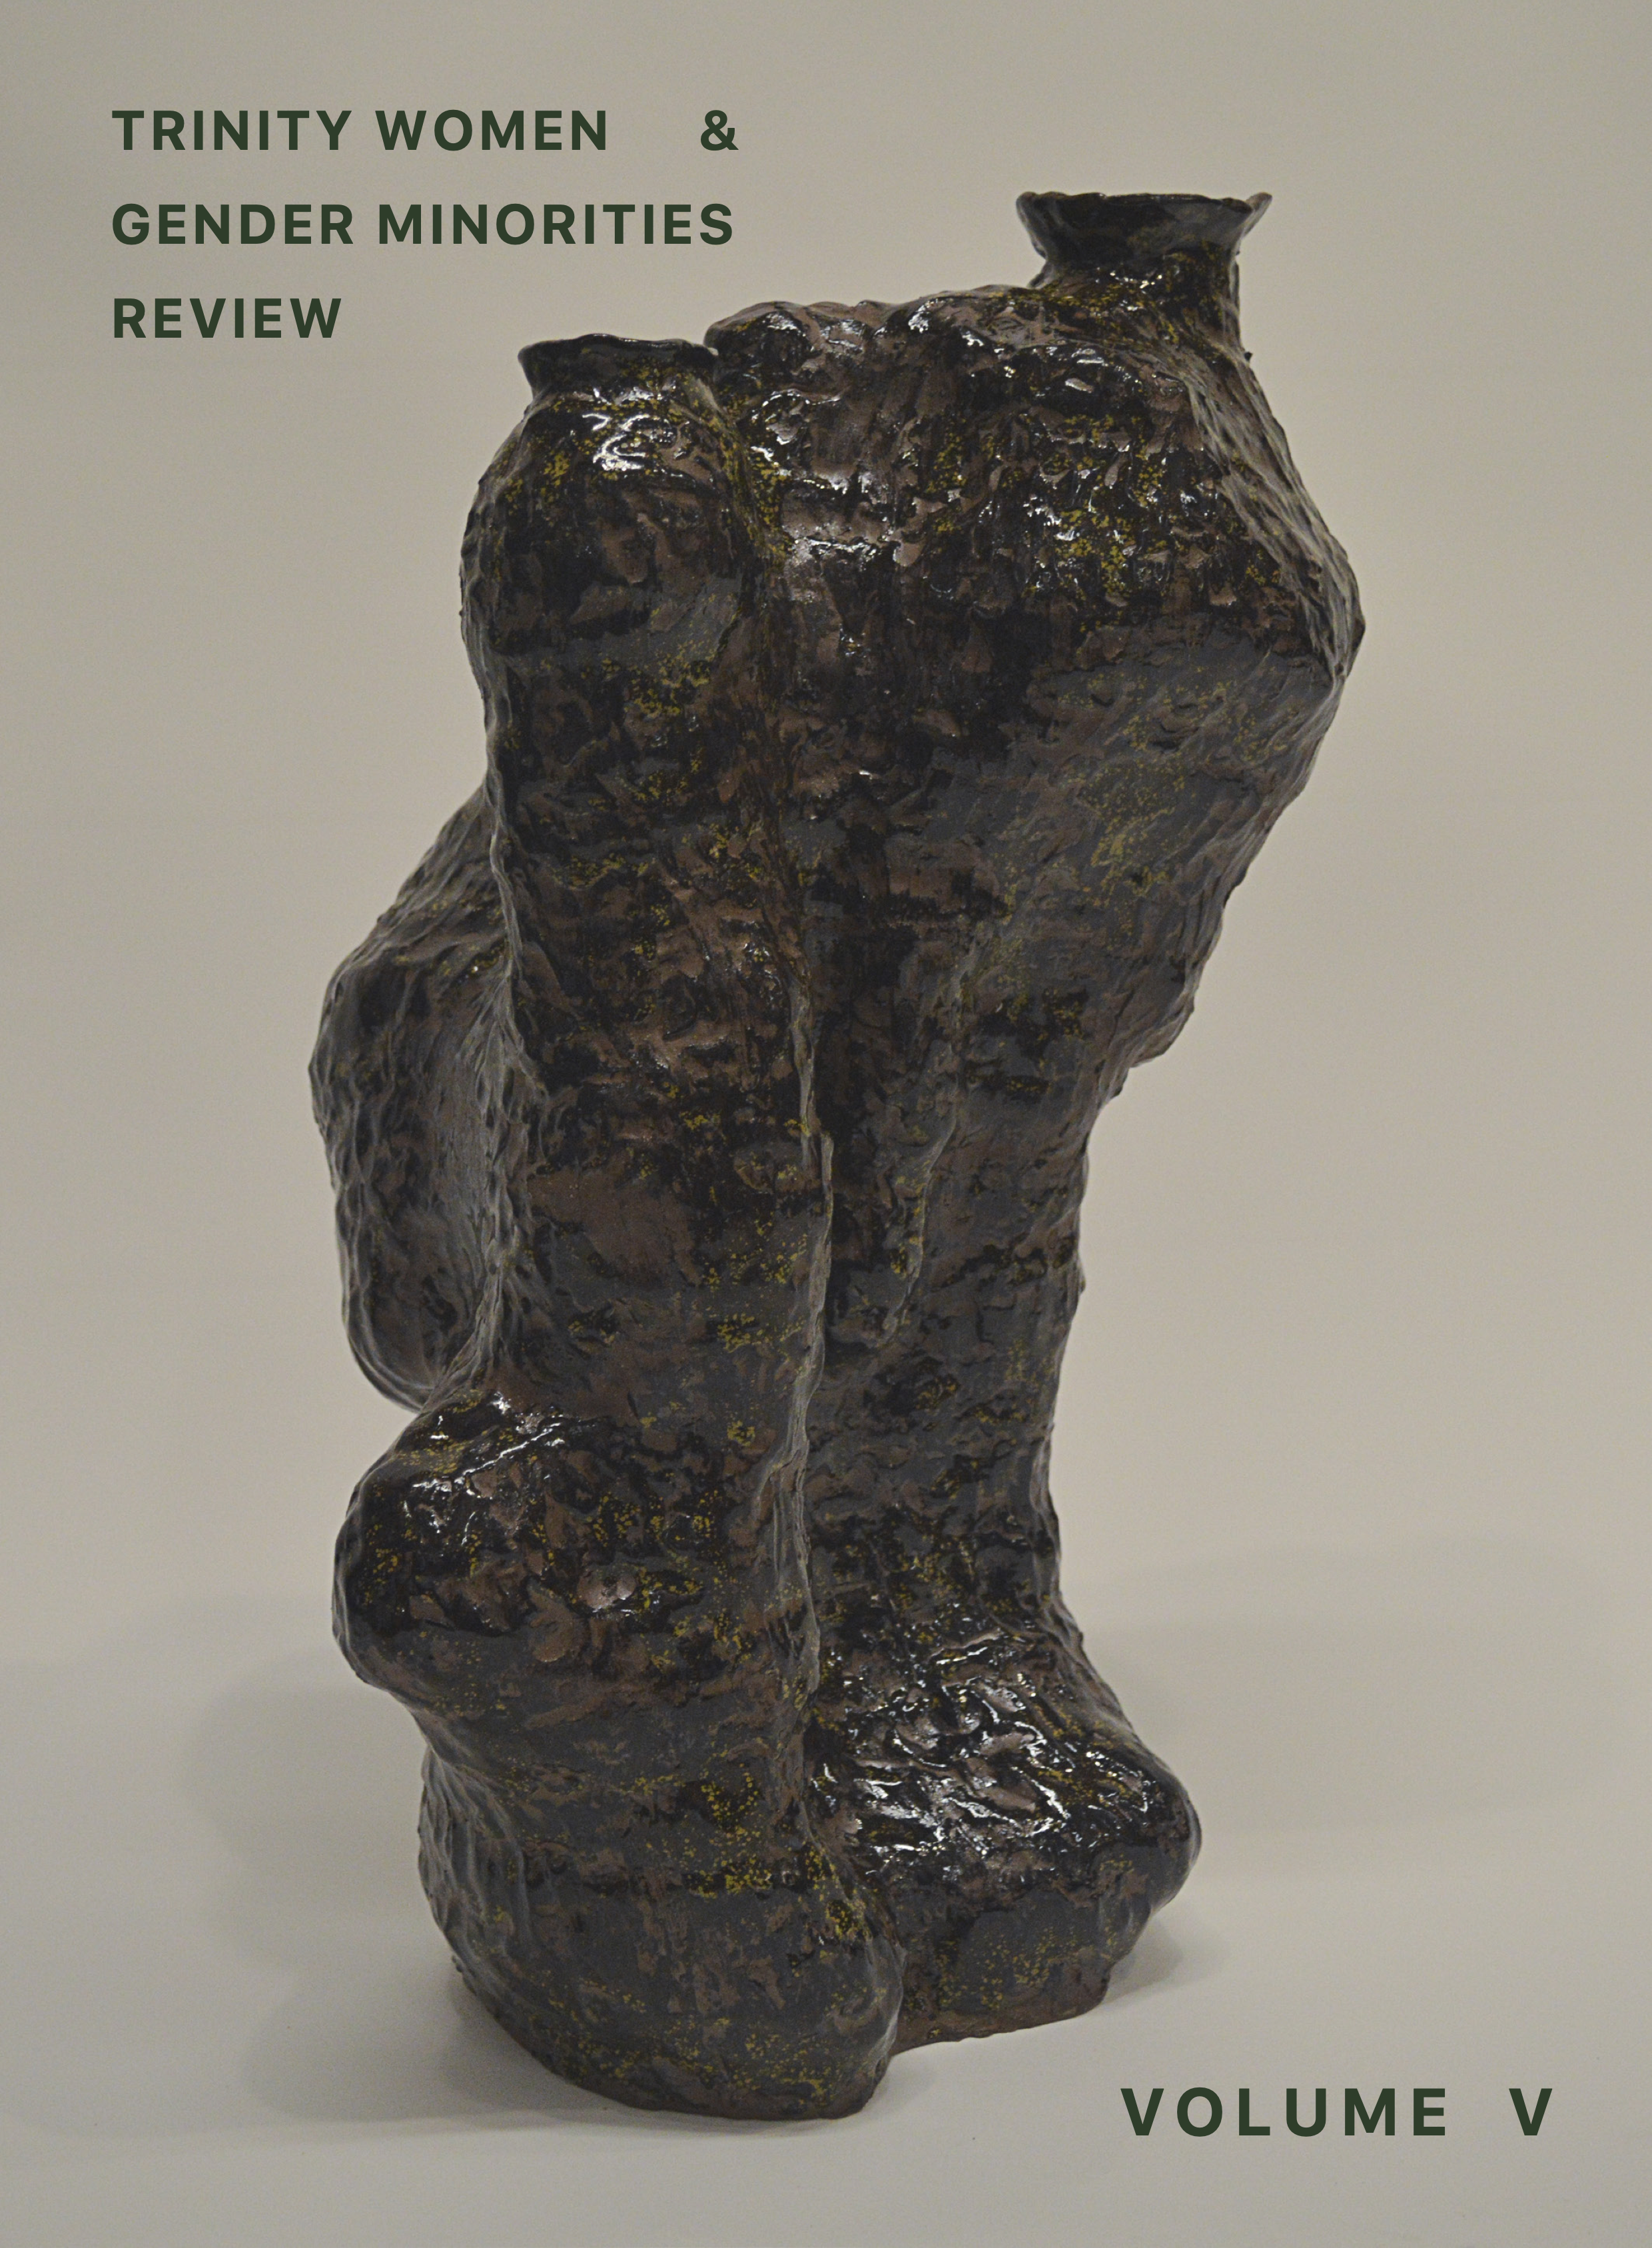 Cover art of Volume V by Eden Sanders; a sculpture of corporeal forms